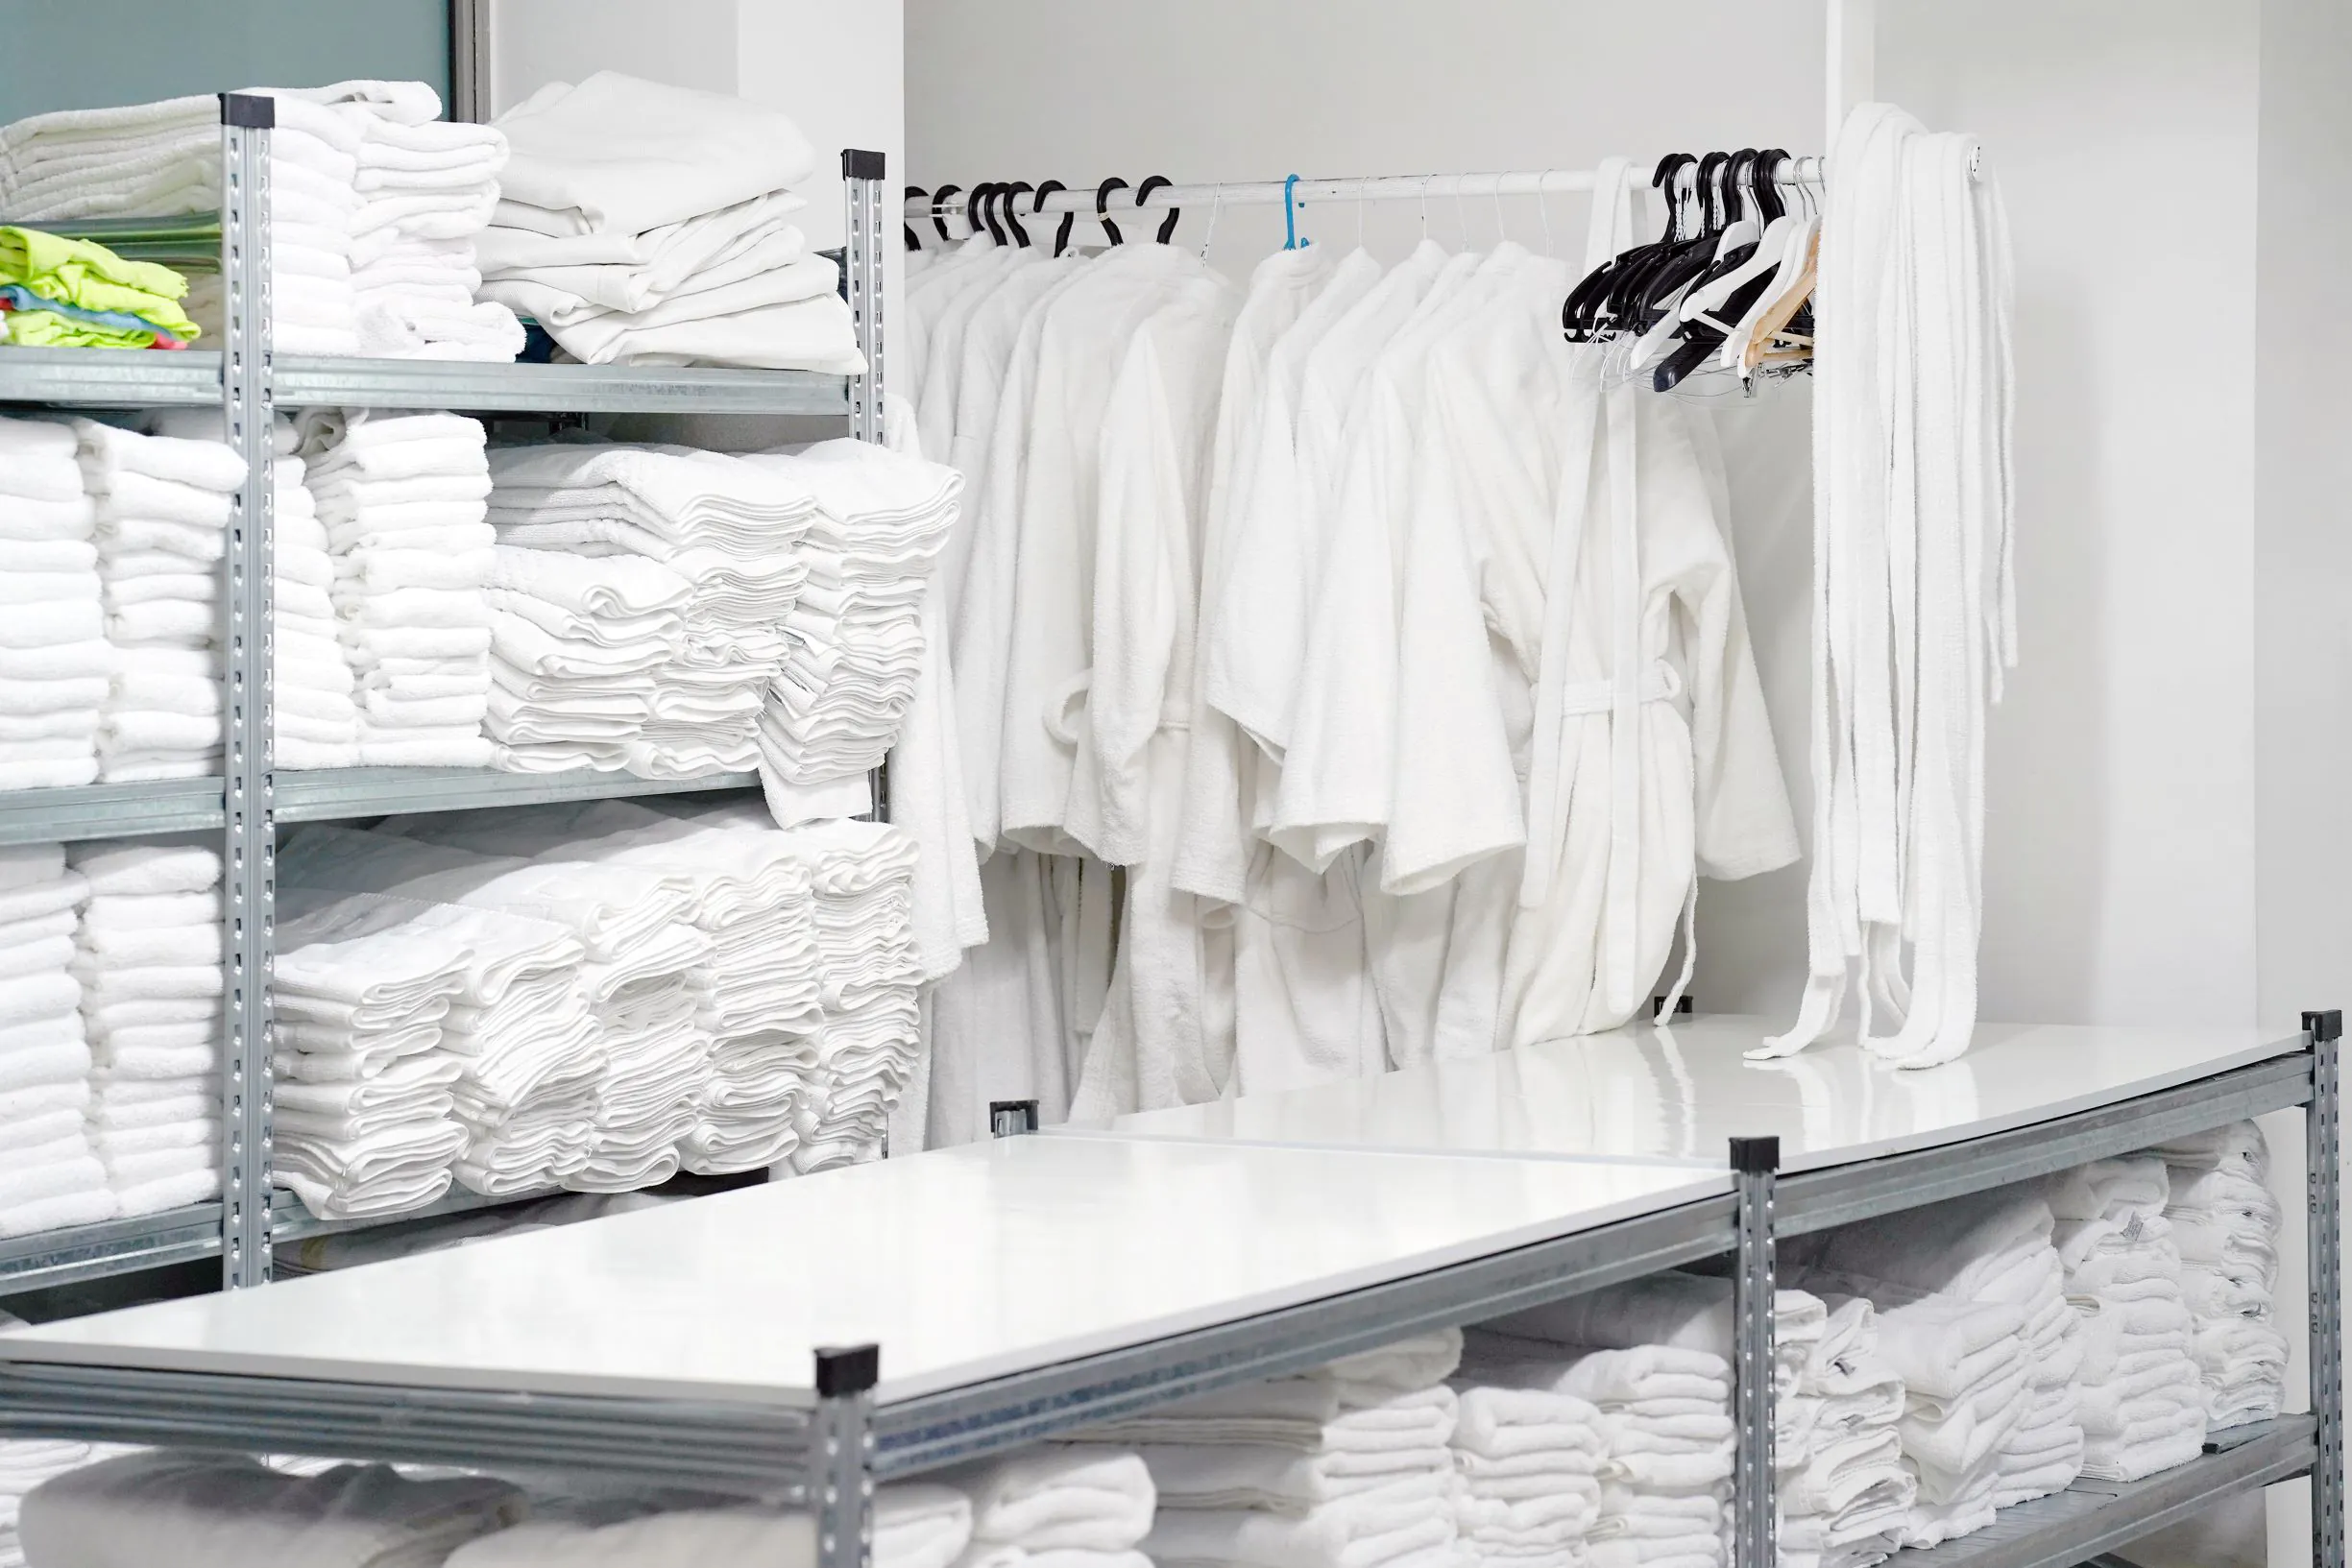 Dry-clean and laundry services companies